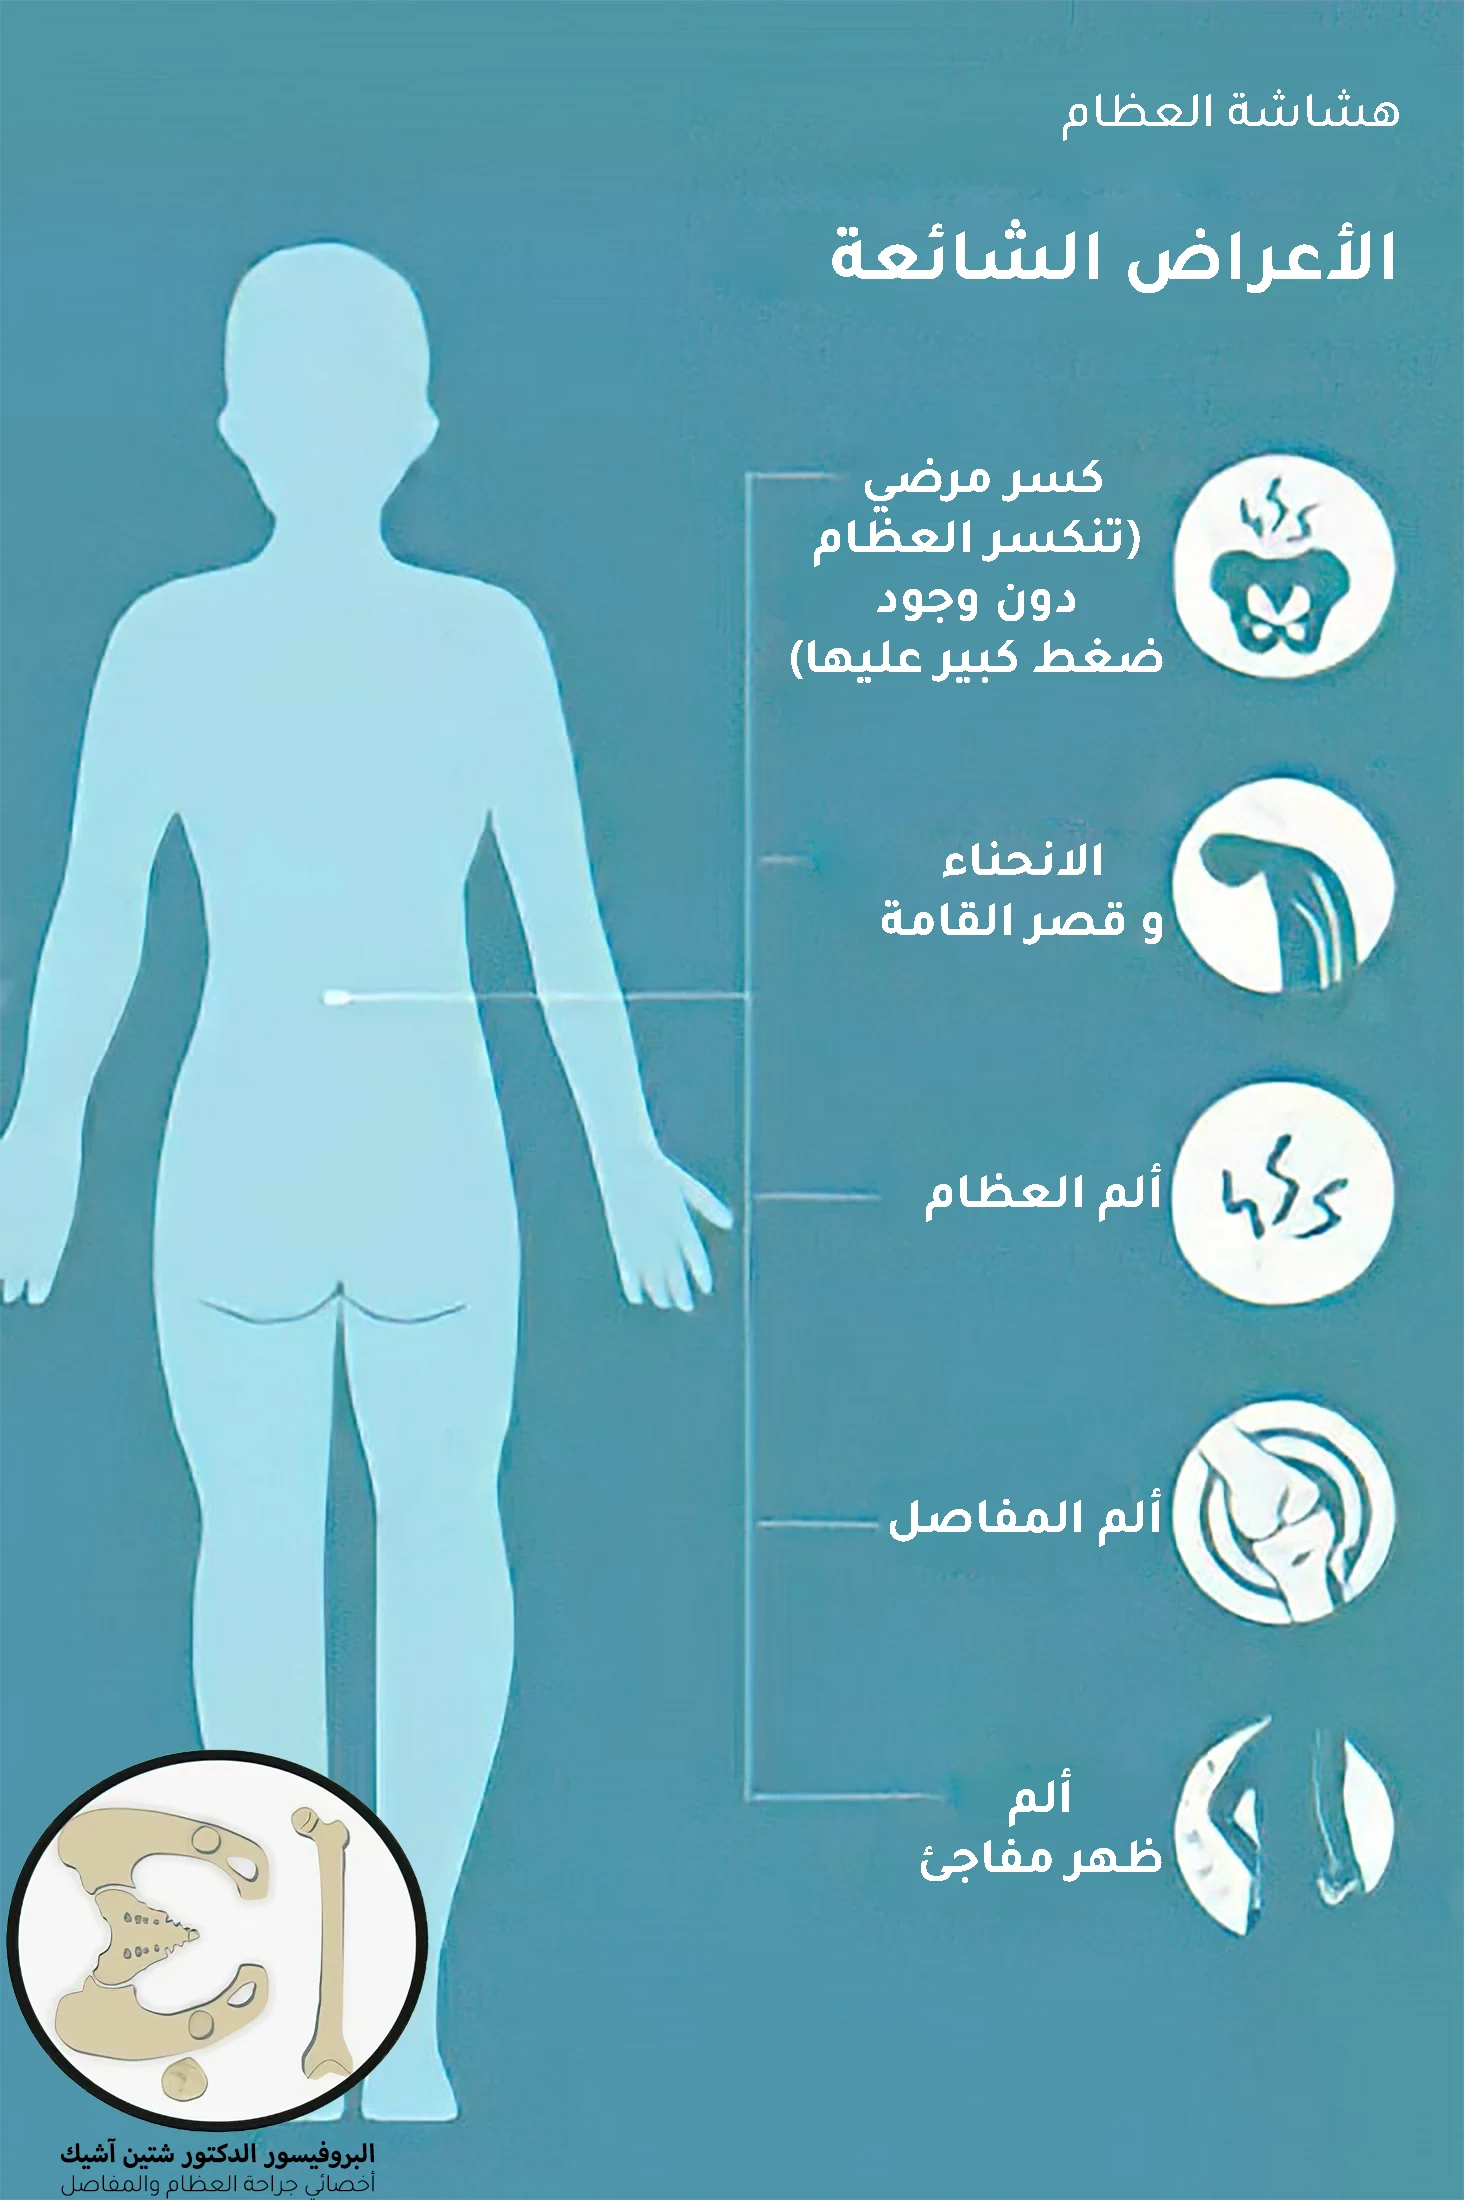 An image showing the most common symptoms experienced by patients with osteoporosis